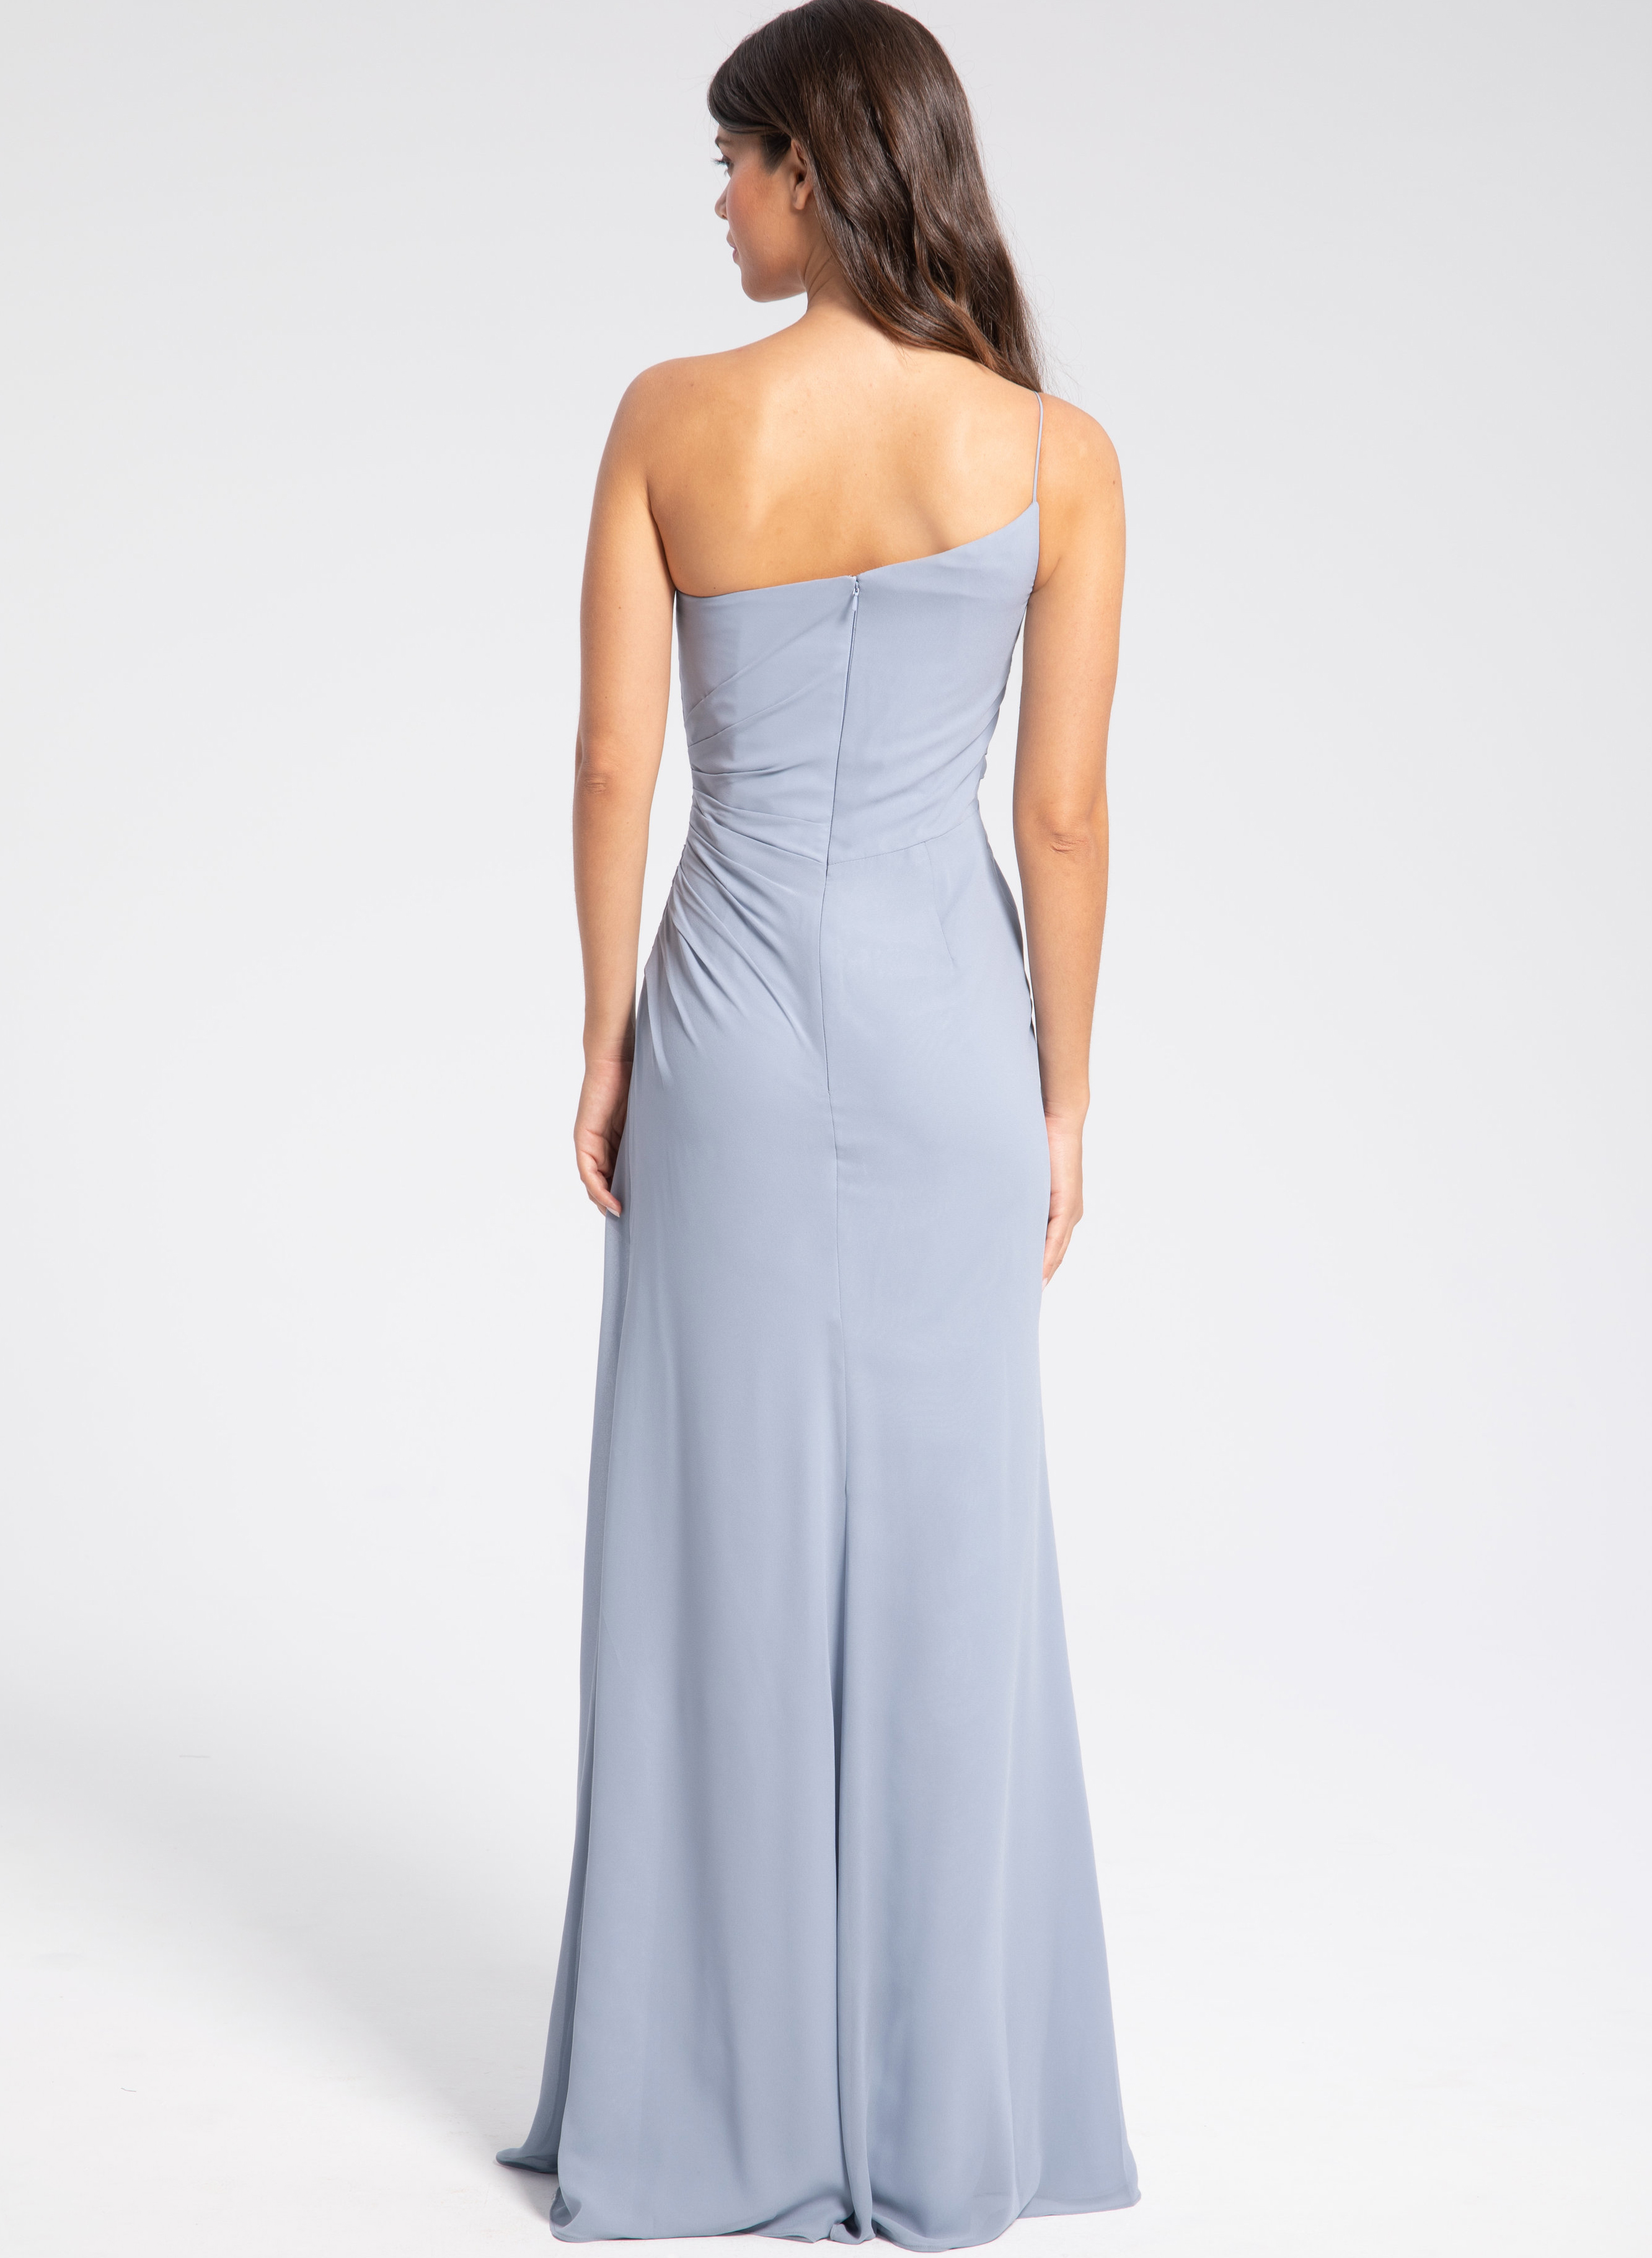 One-Shoulder Spaghetti Straps Trumpet/Mermaid Bridesmaid Dresses With Ruffle